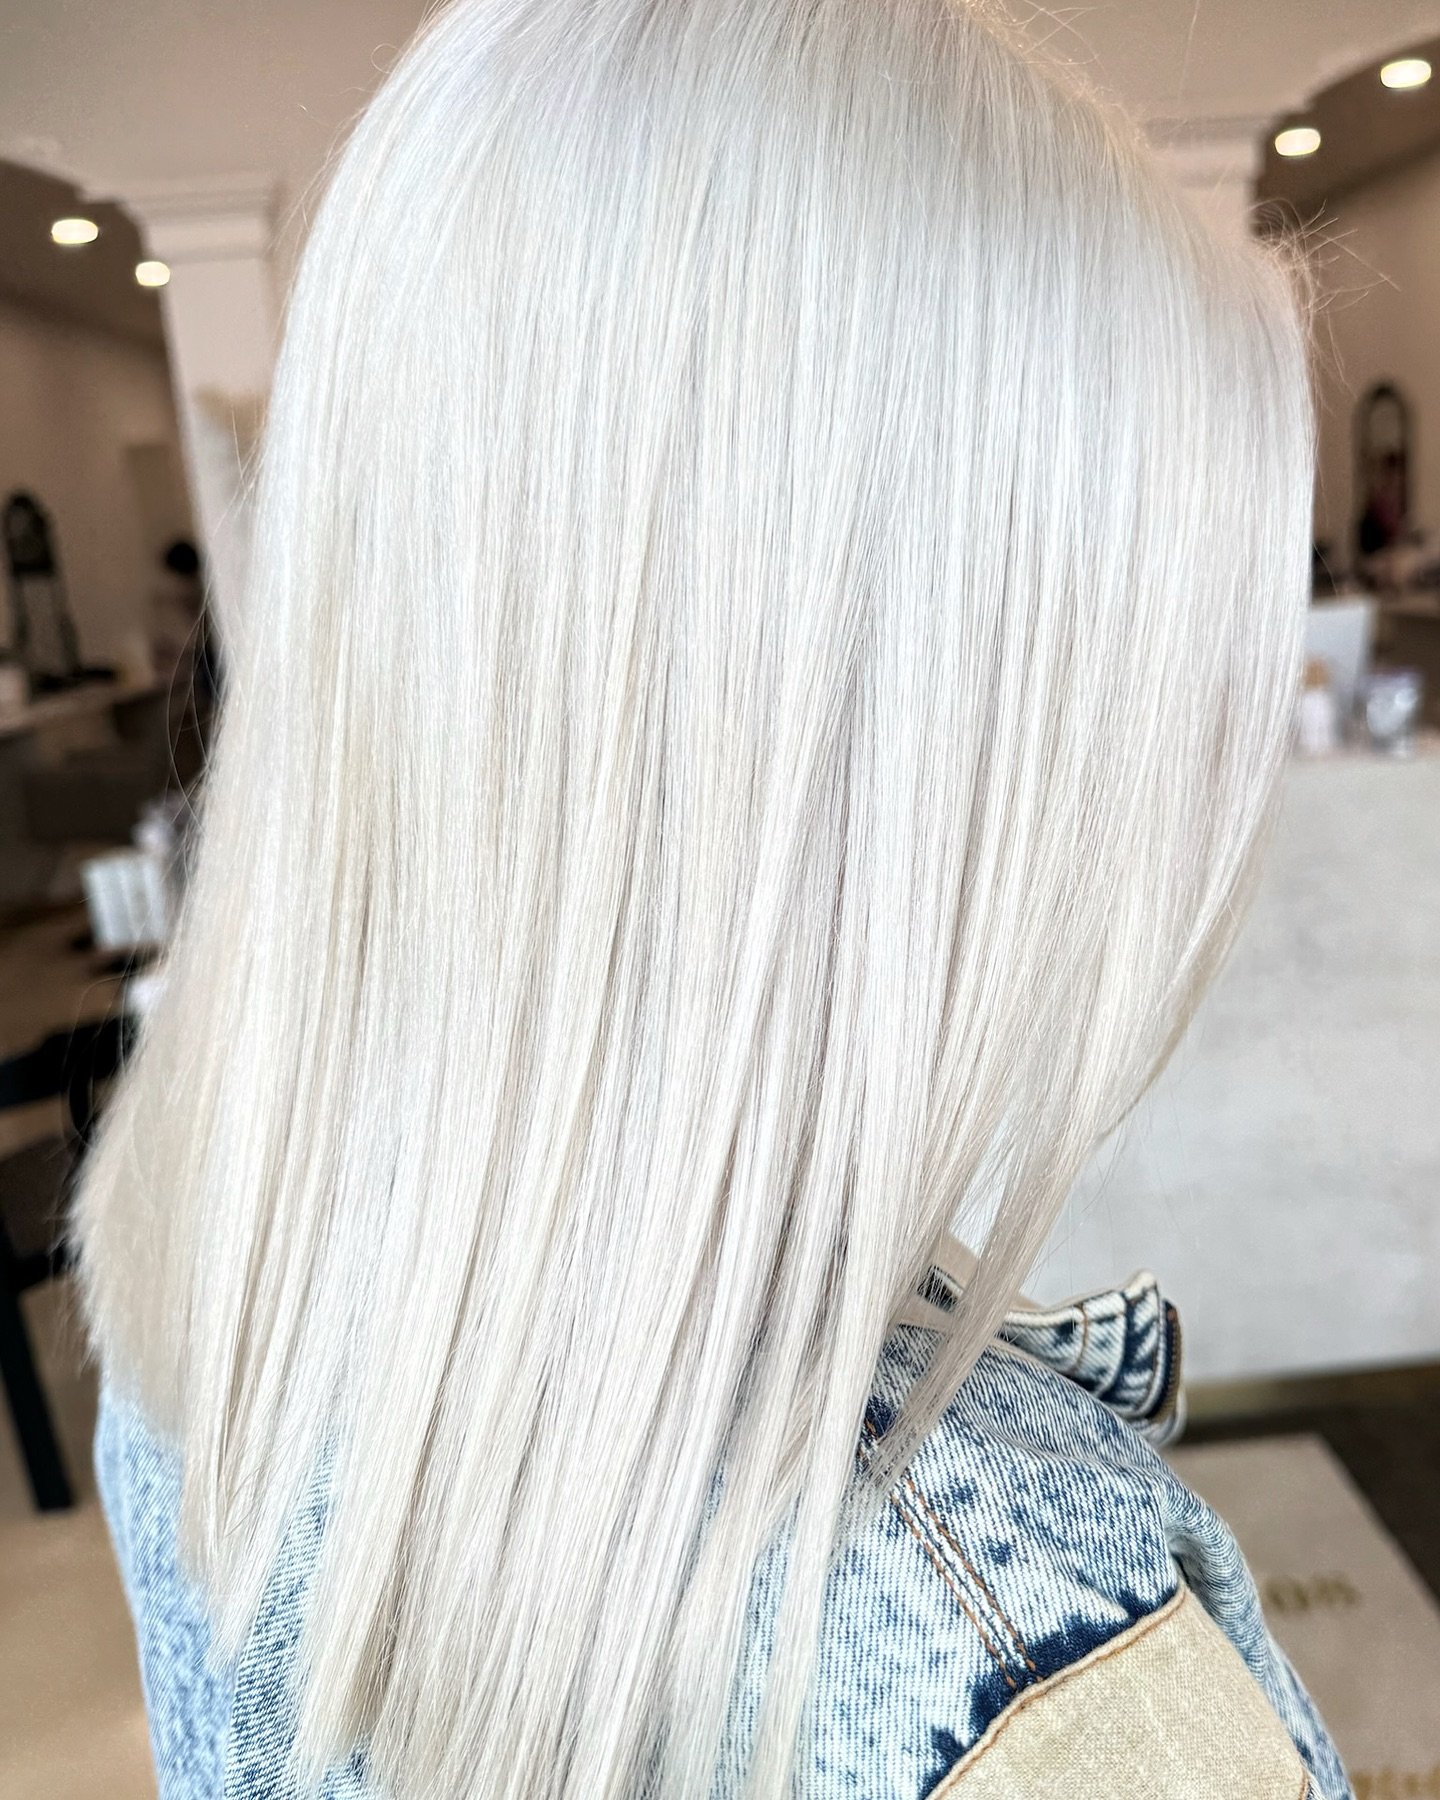 A healthy level ten blonde 😮&zwj;💨

Hair by Ninalee

Try our new Kerastase Premiere in-salon conditioning treatment for $40 ($55 value)

To make an appointment, give us a call at 517.225.5958 or book online at district308.com/book

.
.
.
.
.
Howell